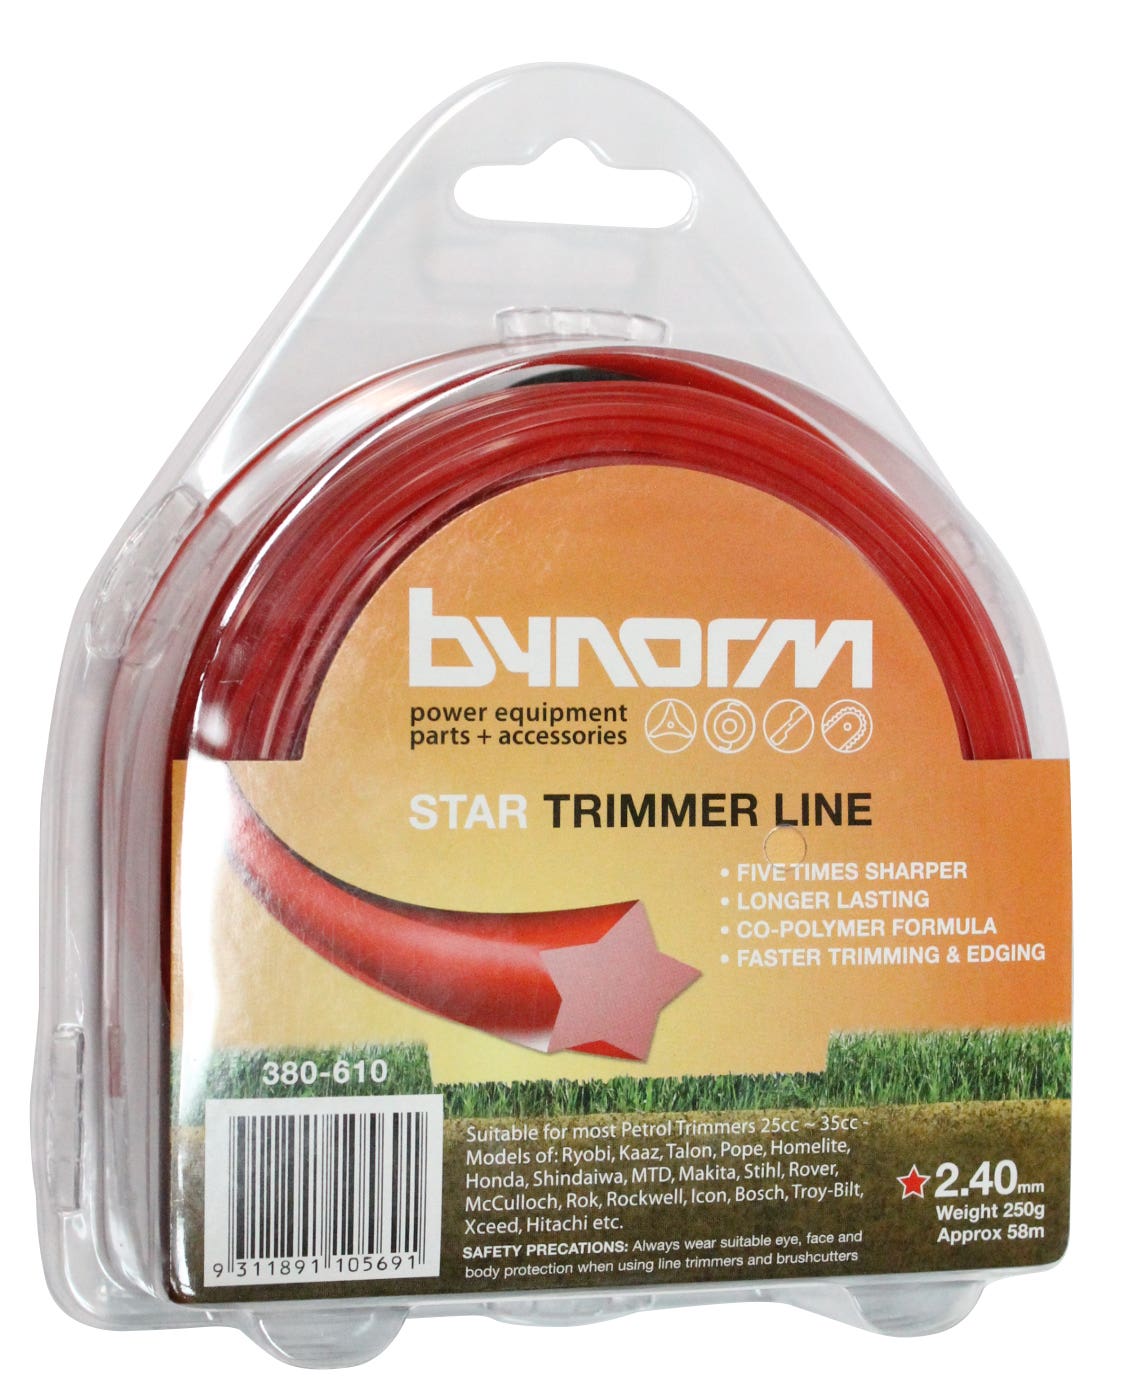 Bynorm Star Trimmer Line Red 2.4mm 250g